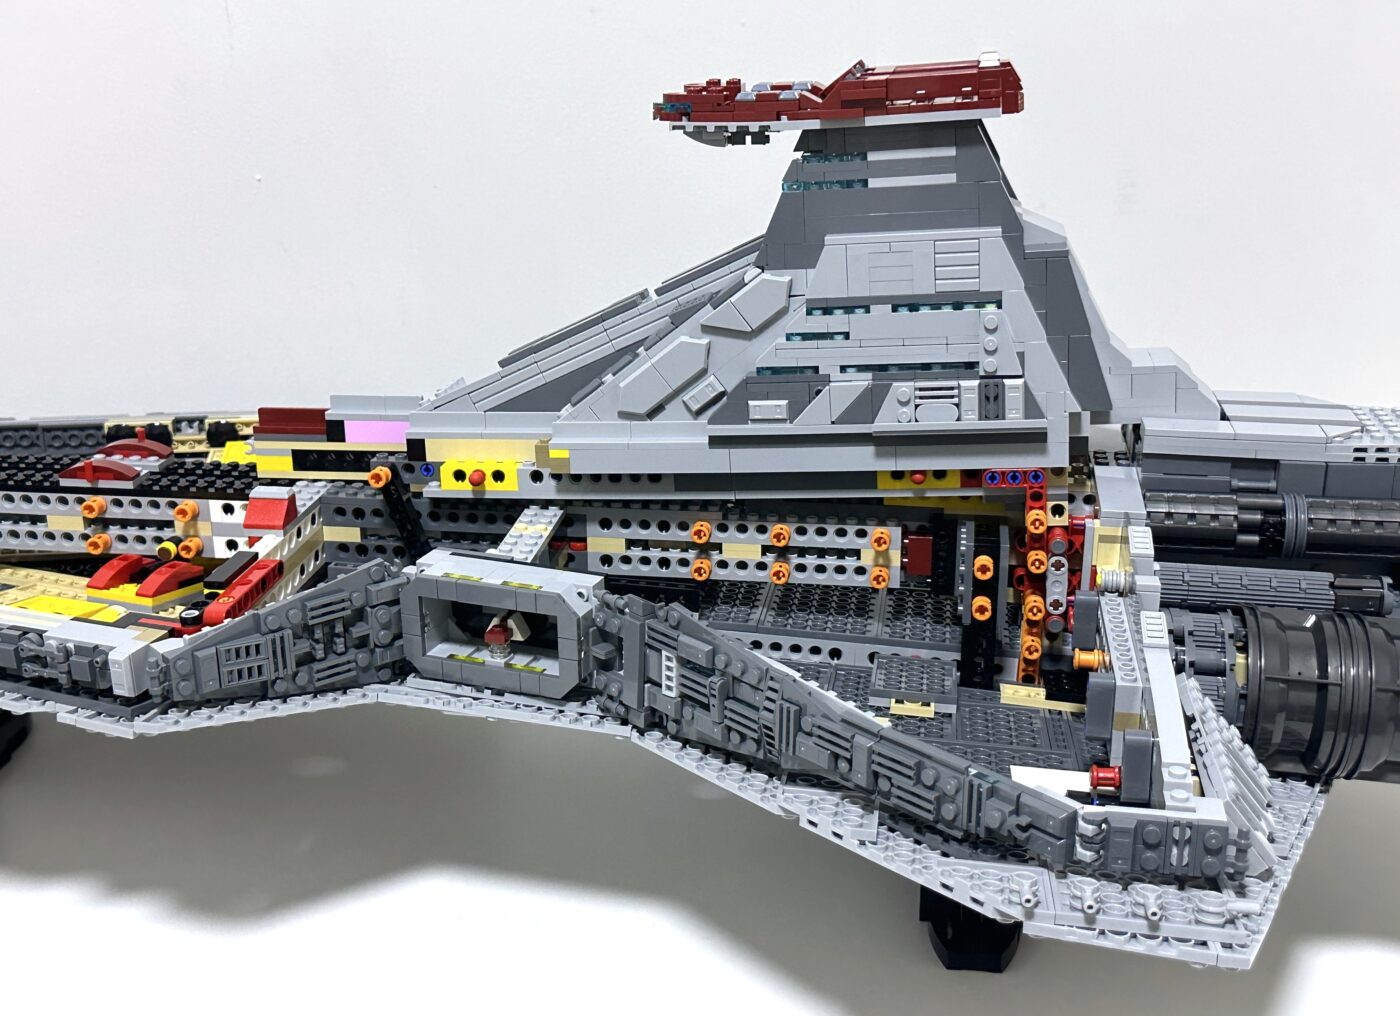 ▻ Review : LEGO Star Wars Ultimate Collector Series 75367 Venator